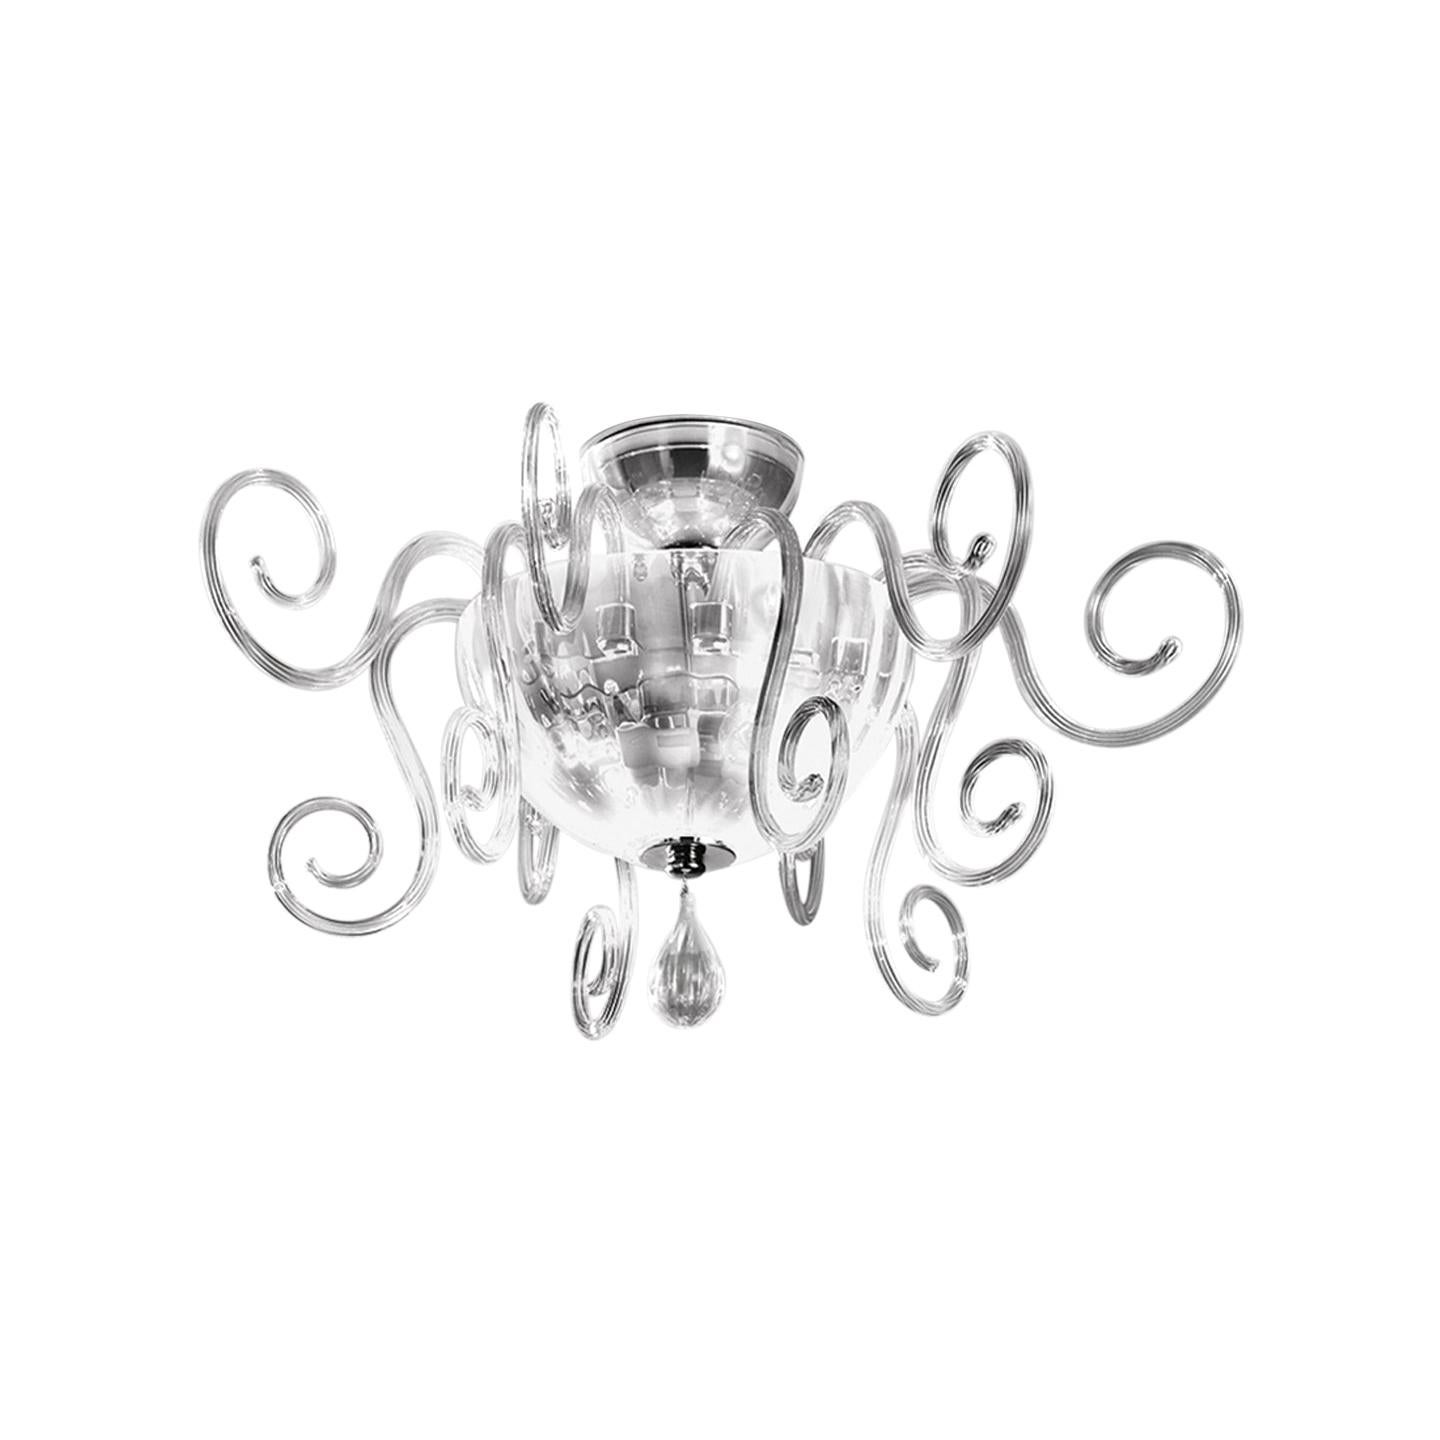 Leucos Bolero PL Ceiling Light in Crystal and Chrome by Carlo Nason For Sale